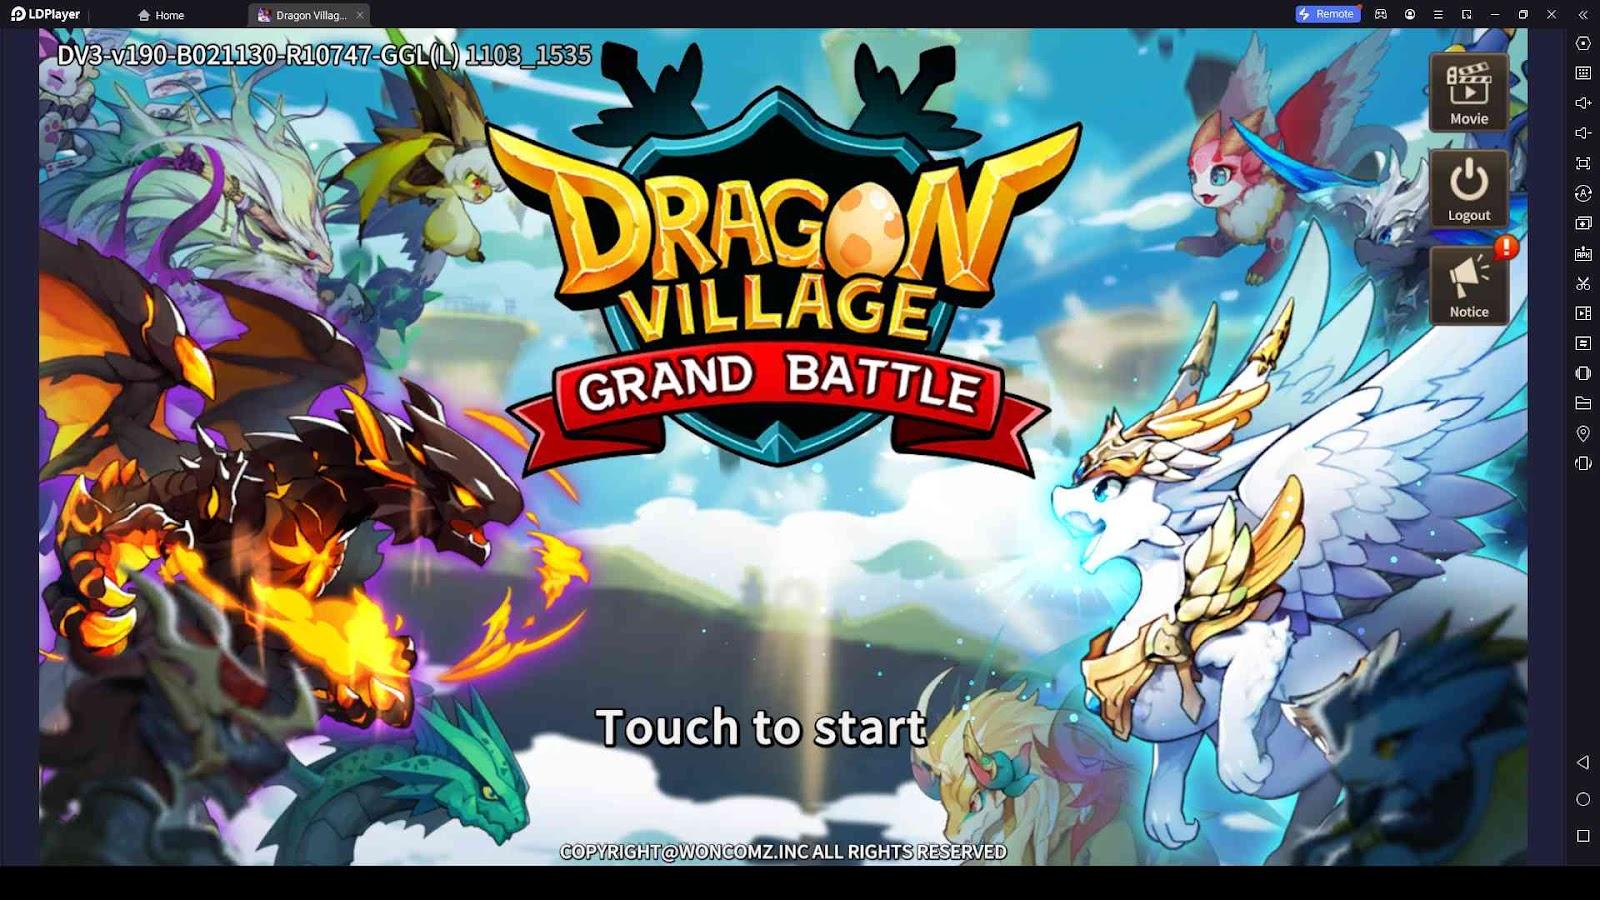 Dragon Village Grand Battle Beginner Tips and Tricks for a Perfect Start